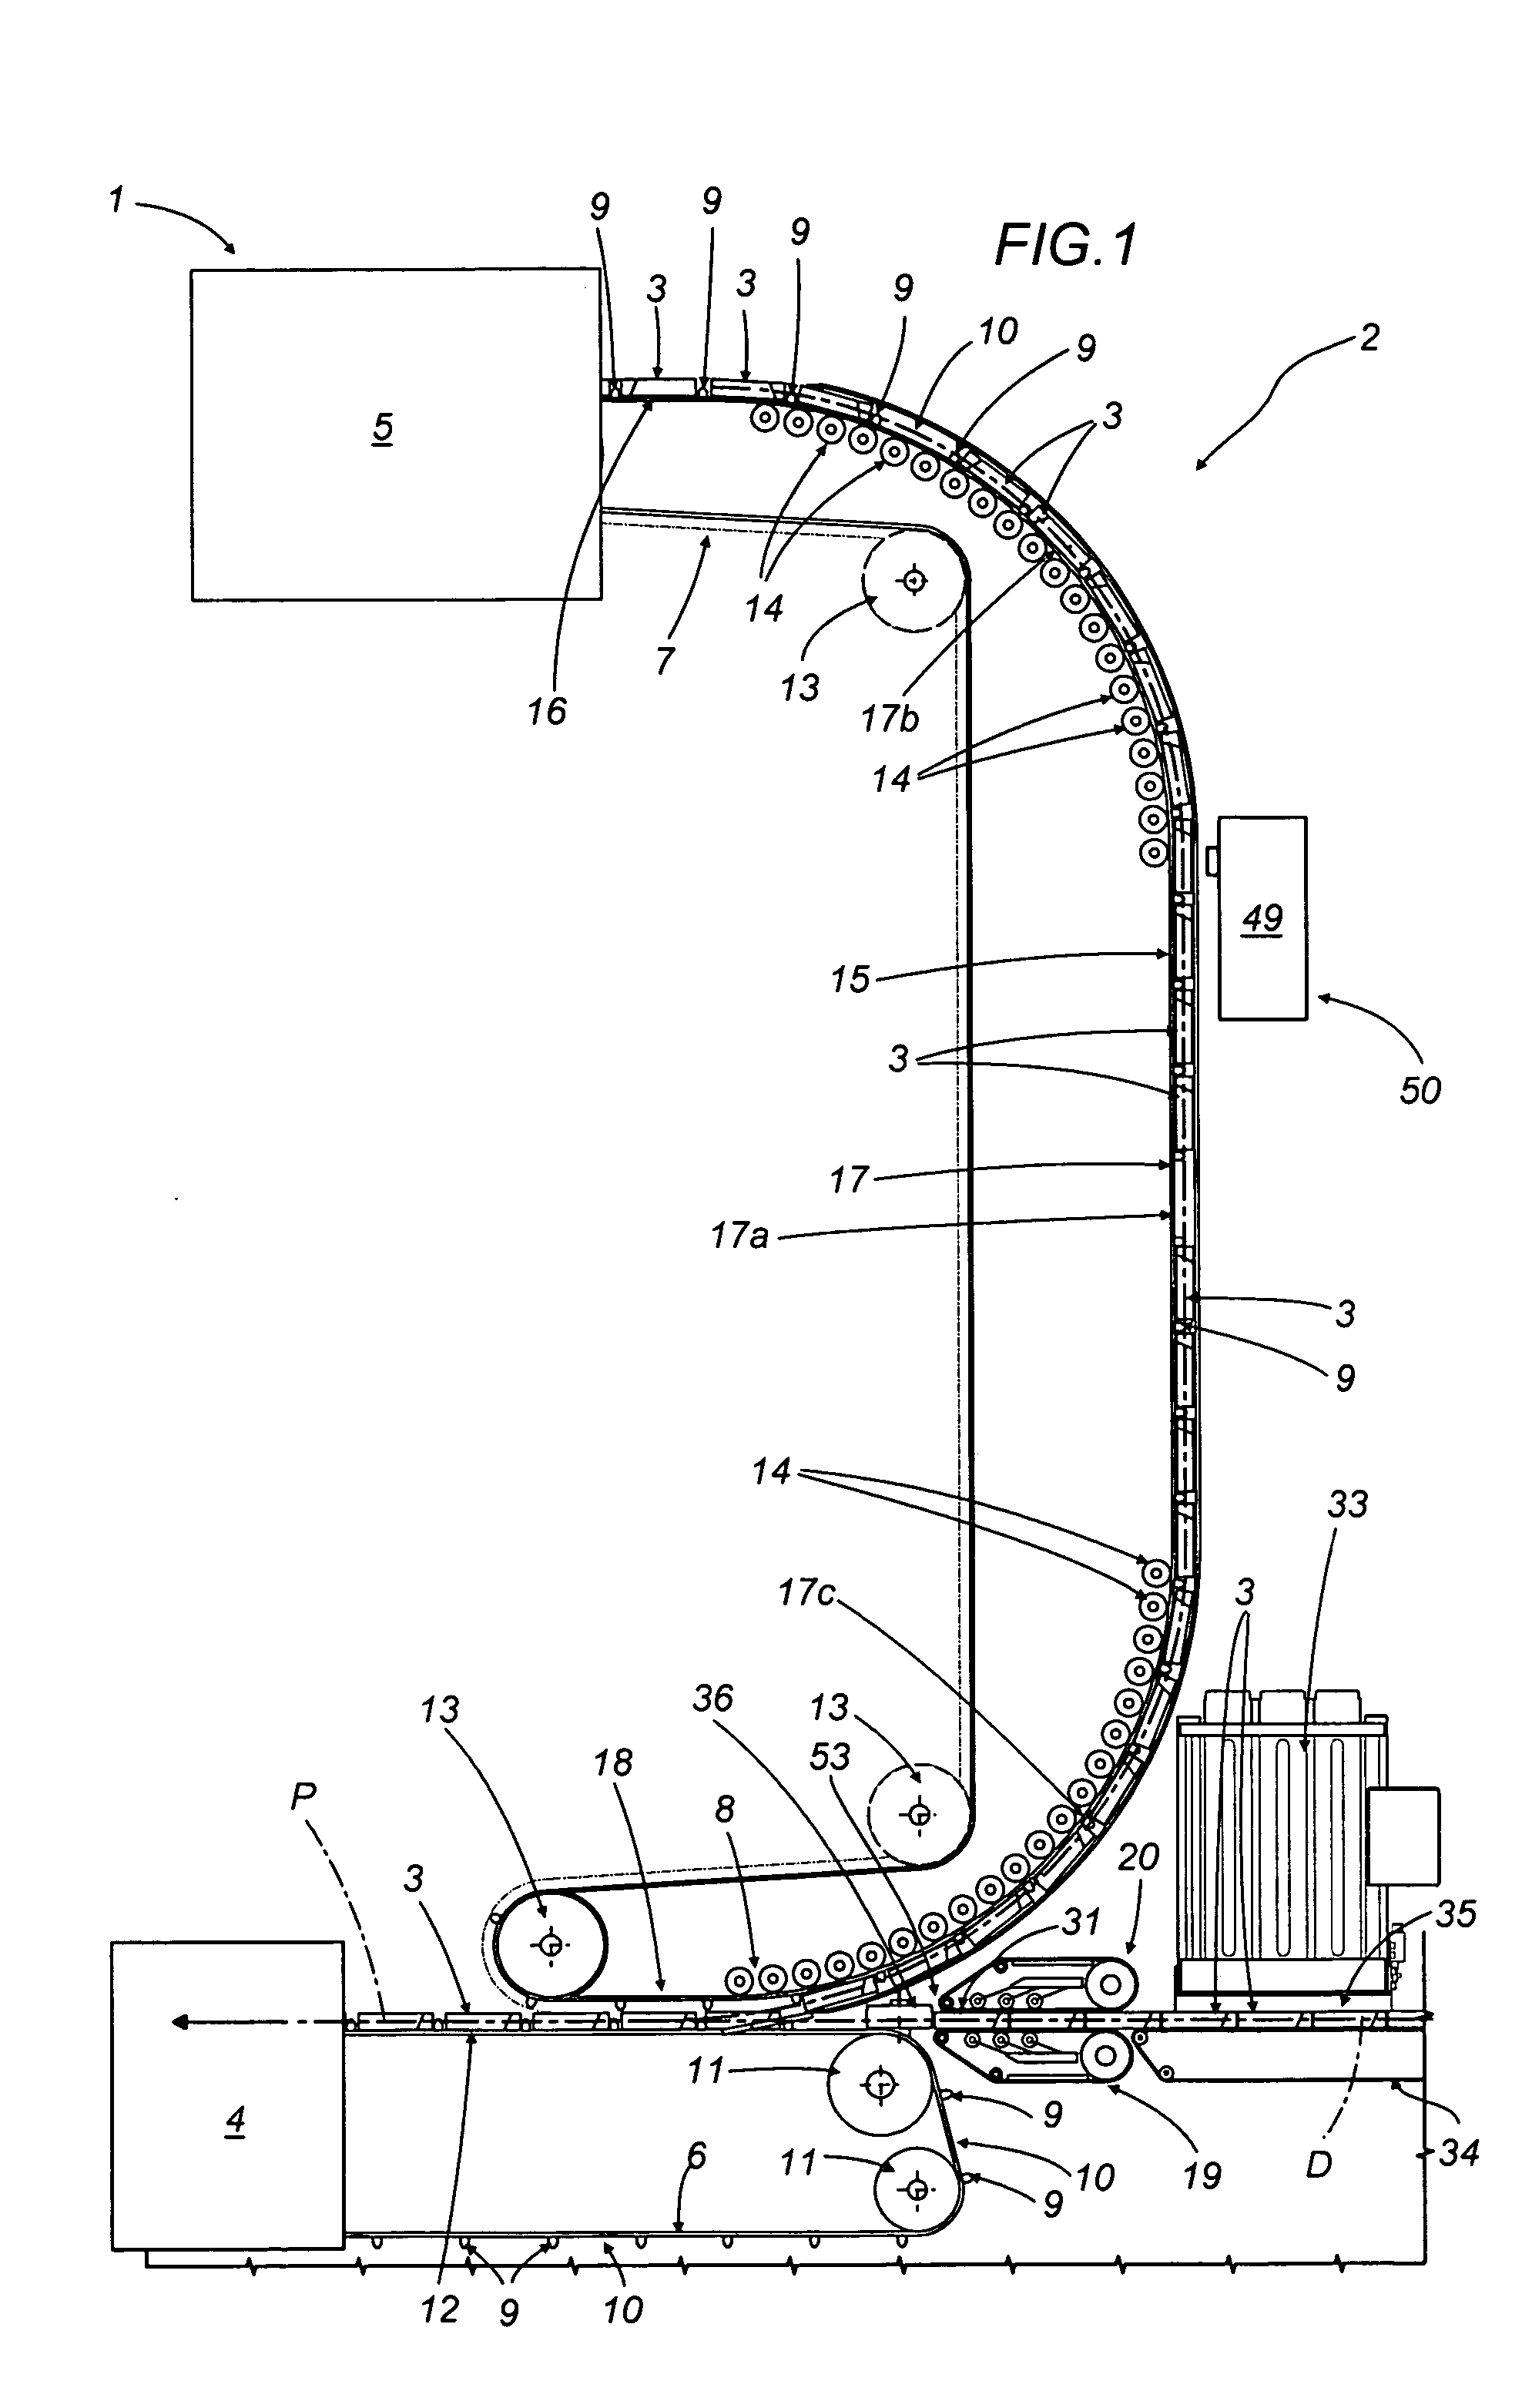 Unit for conveying products